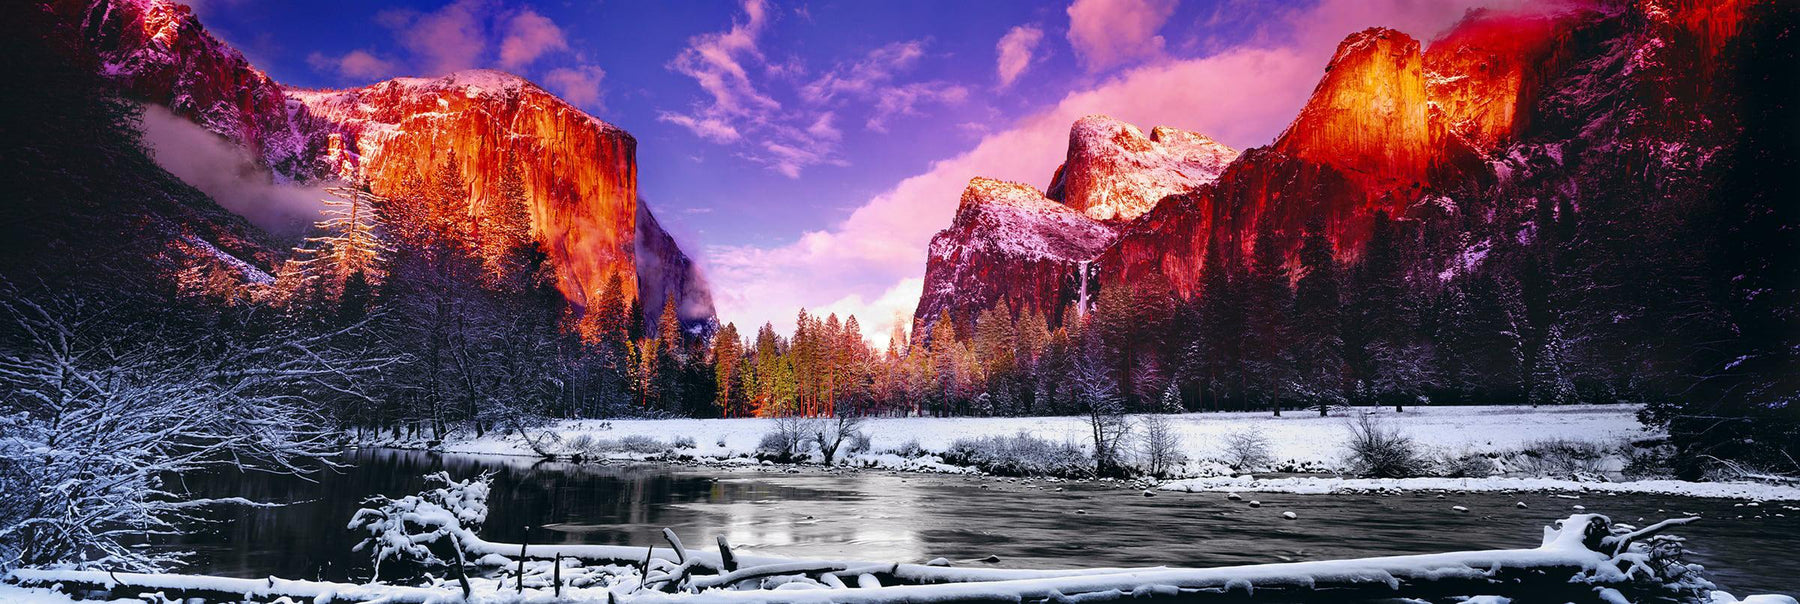 River running through the snow covered Yosemite Valley with El Capitan mountain in the background